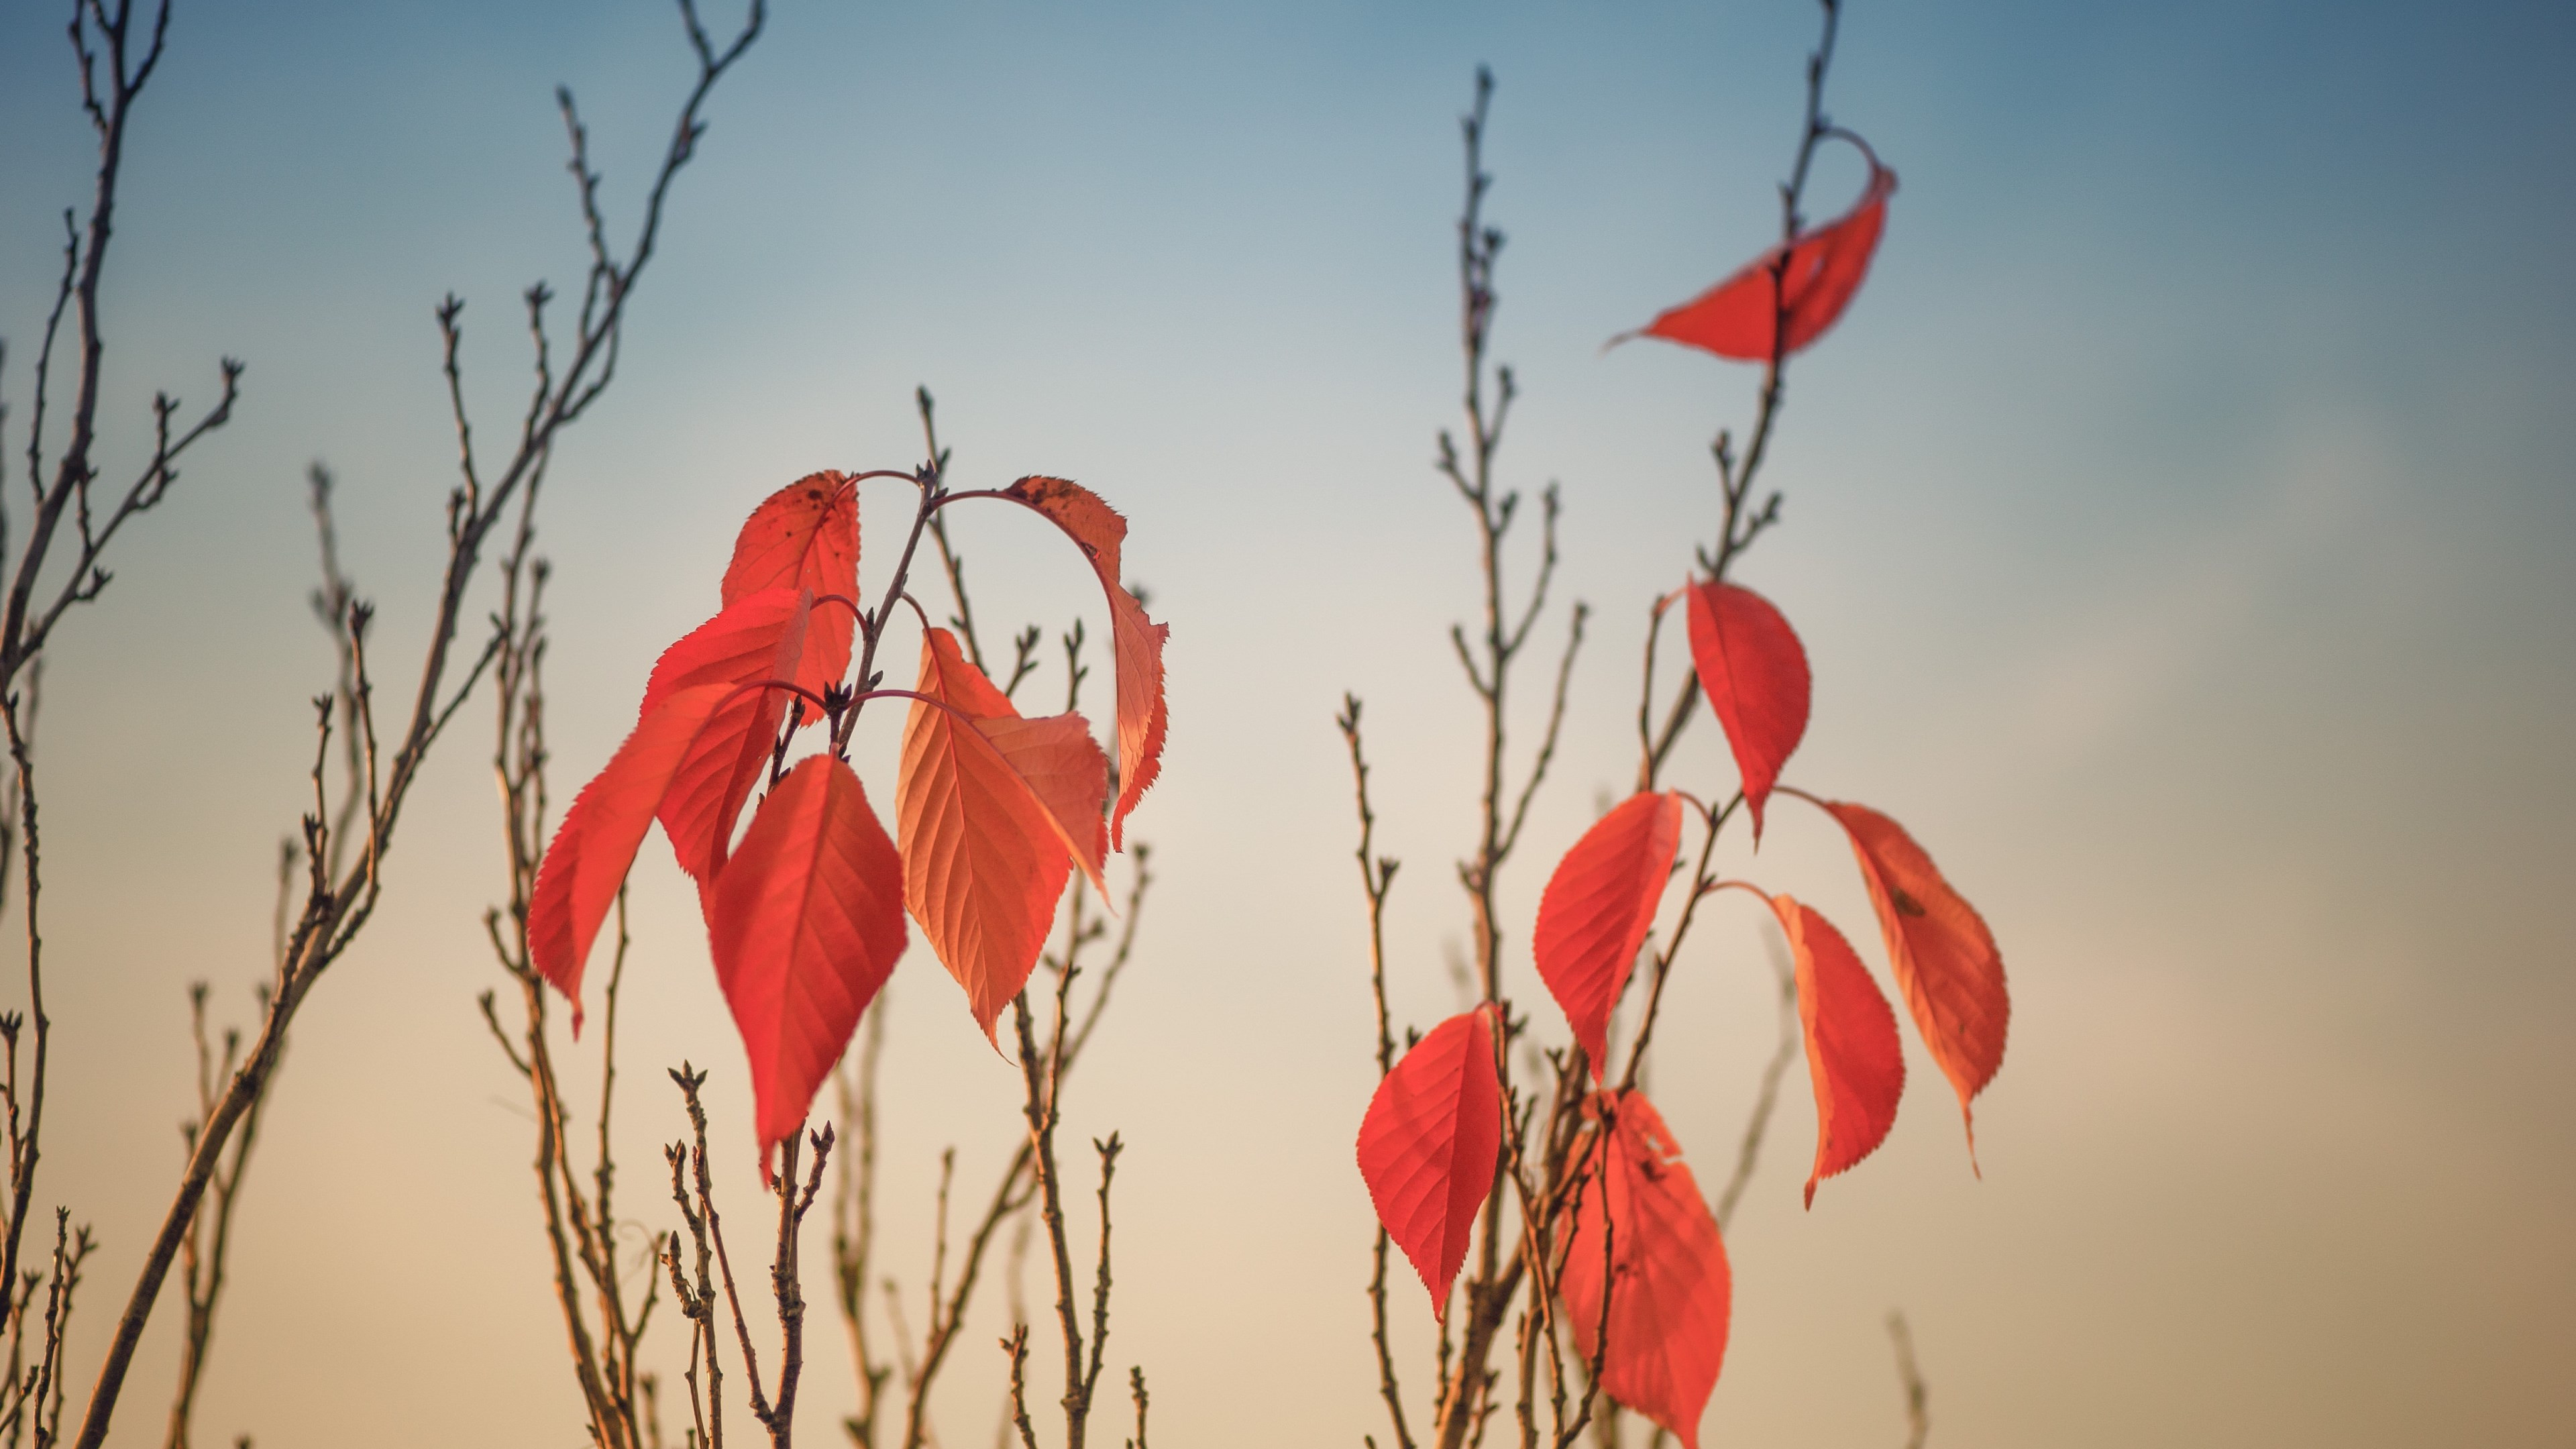 Autumn leaves on tree branches wallpaper 3840x2160